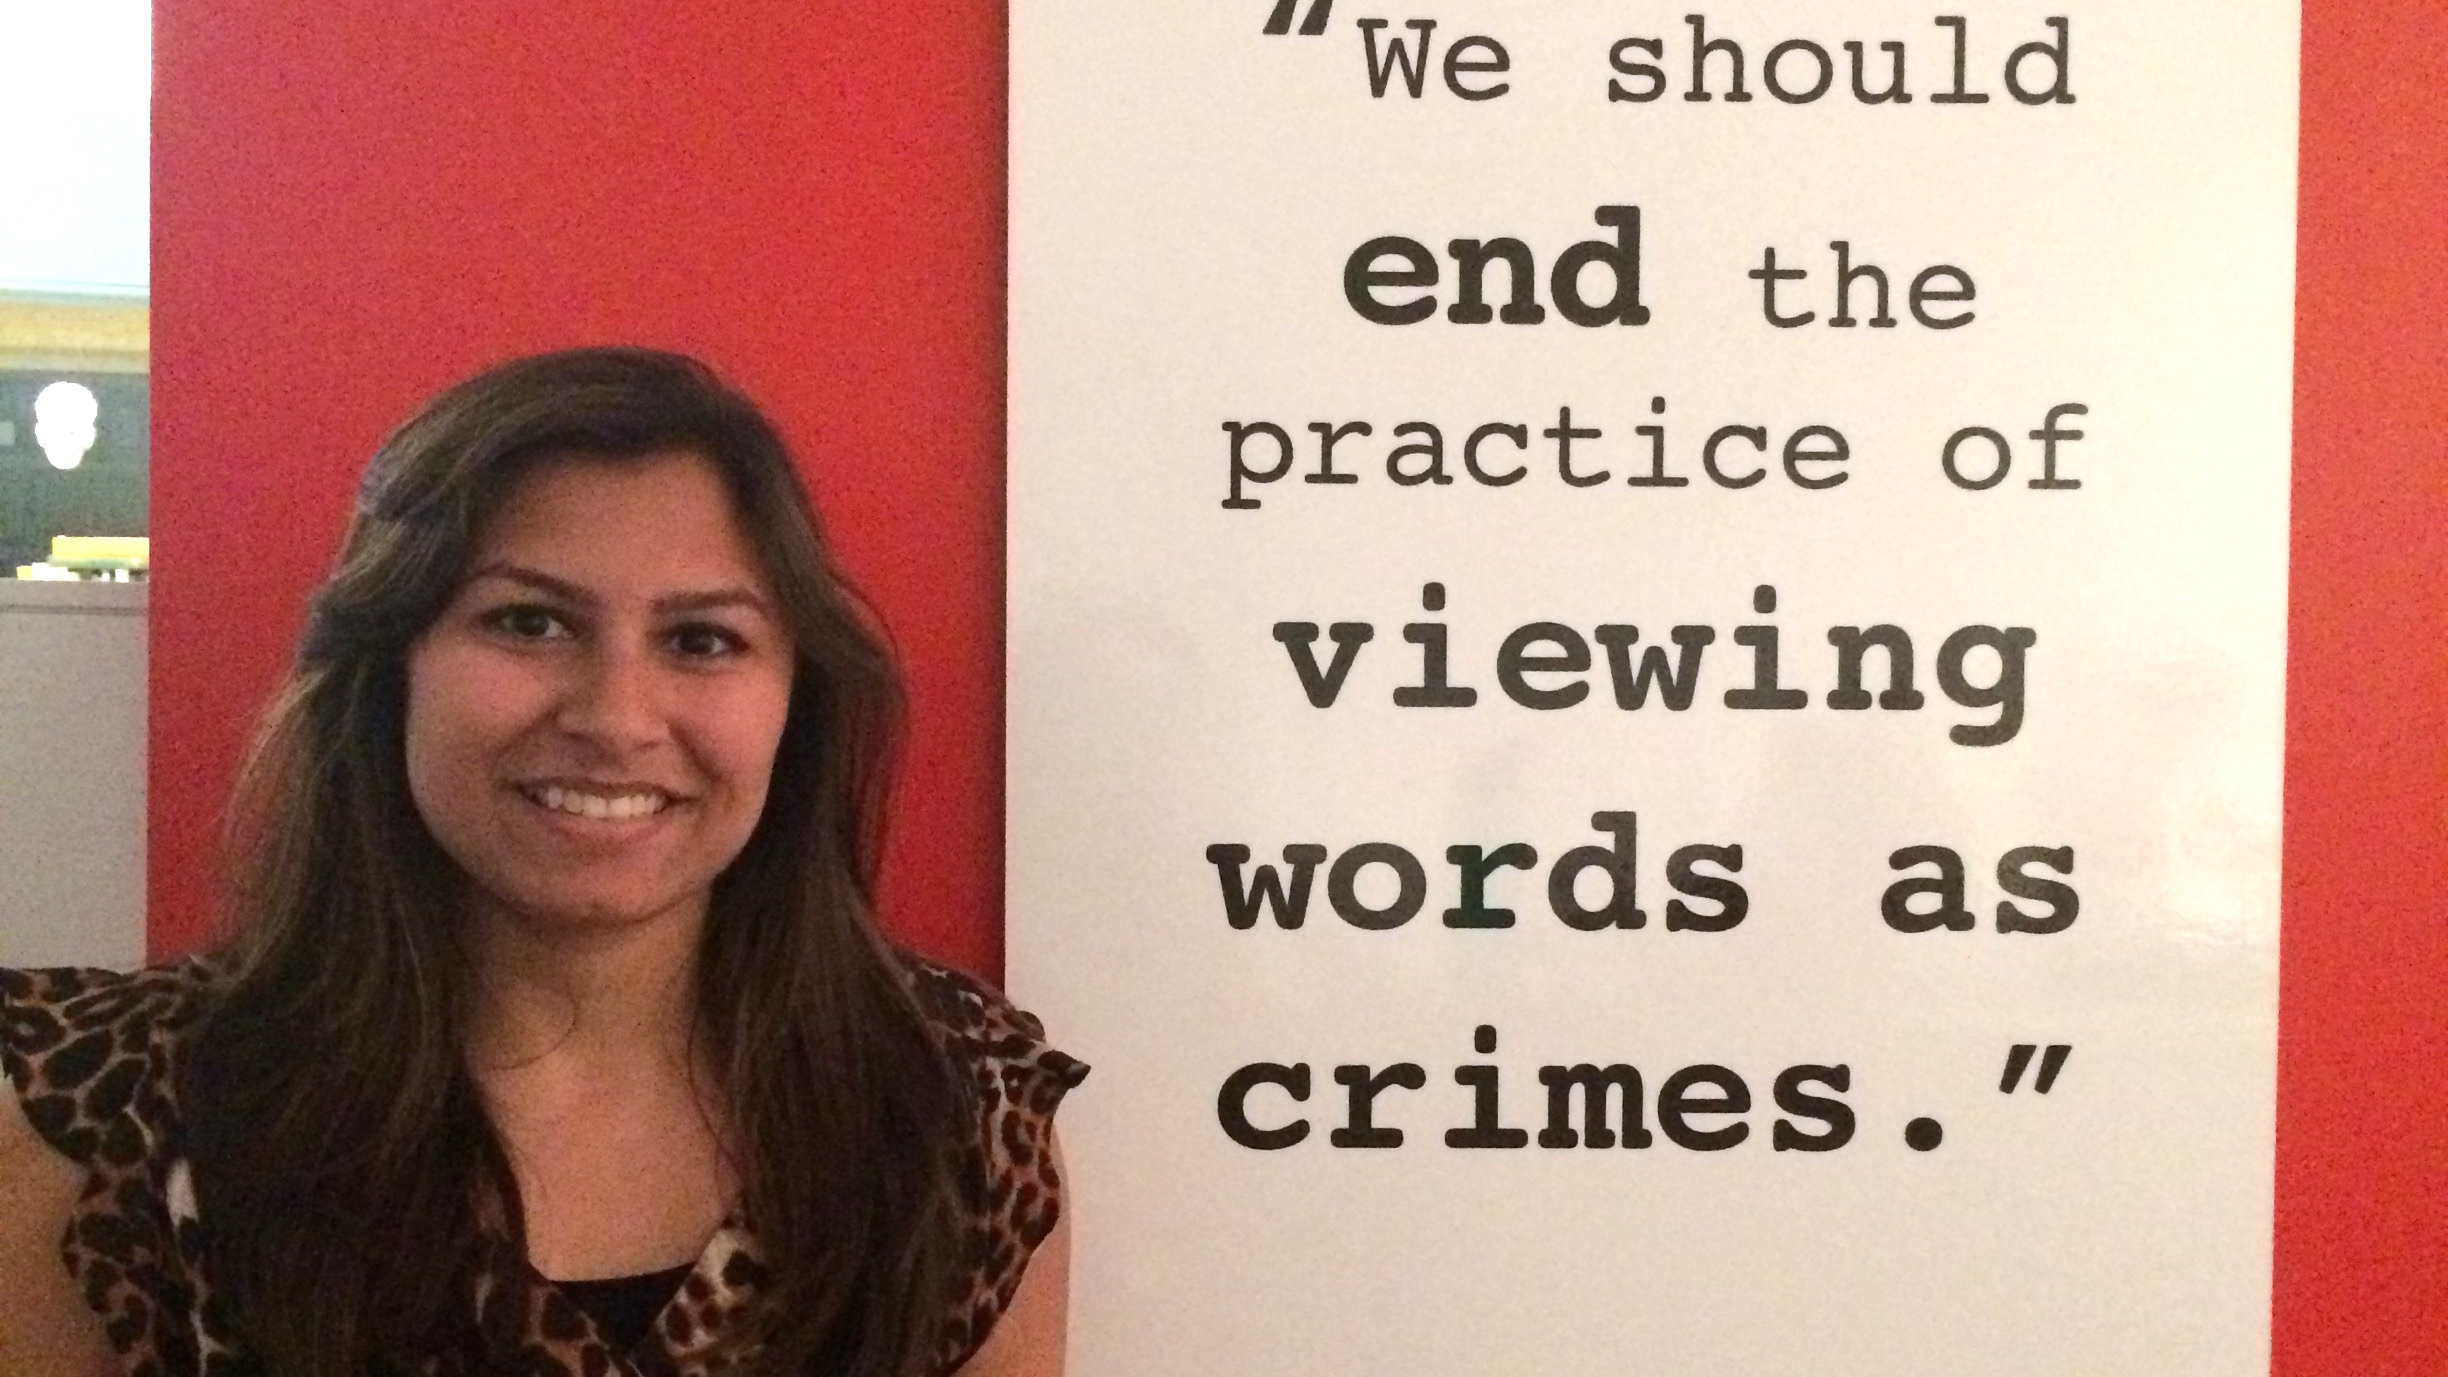 student we should end the practice of viewing words as crimes